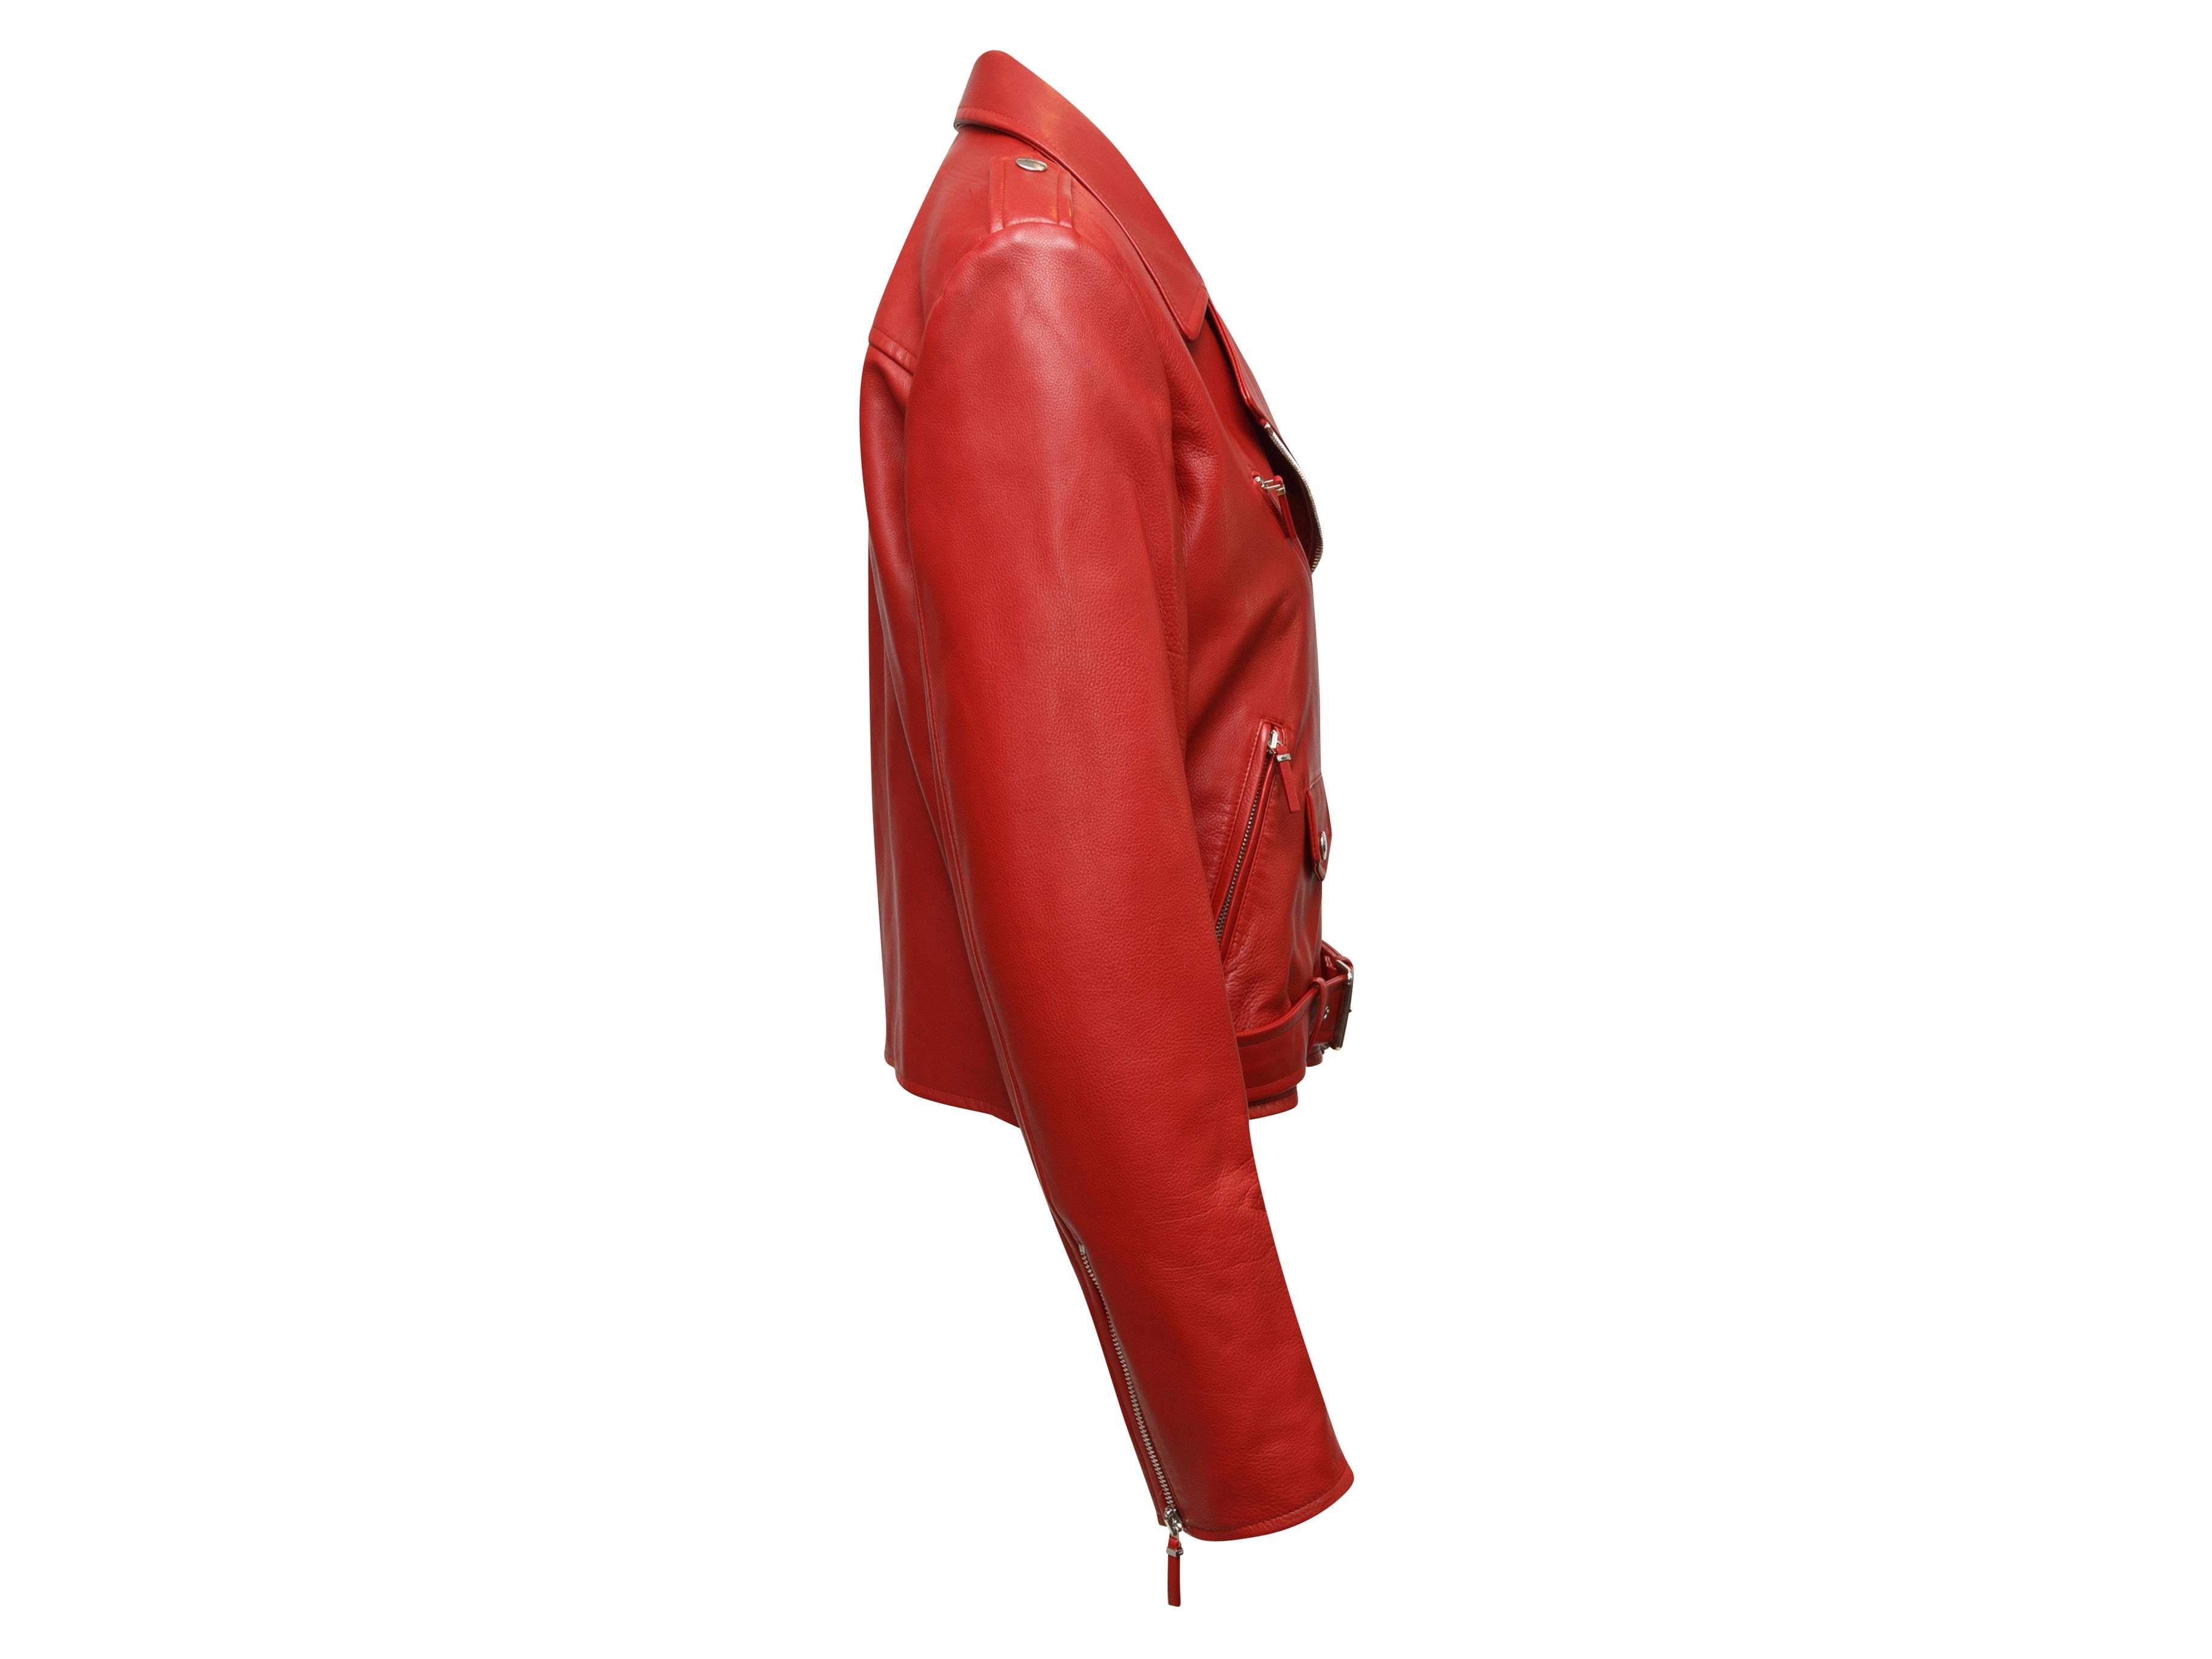 Product details: Red leather moto jacket by The Row. Silver-tone hardware. Zip closure at front. 36